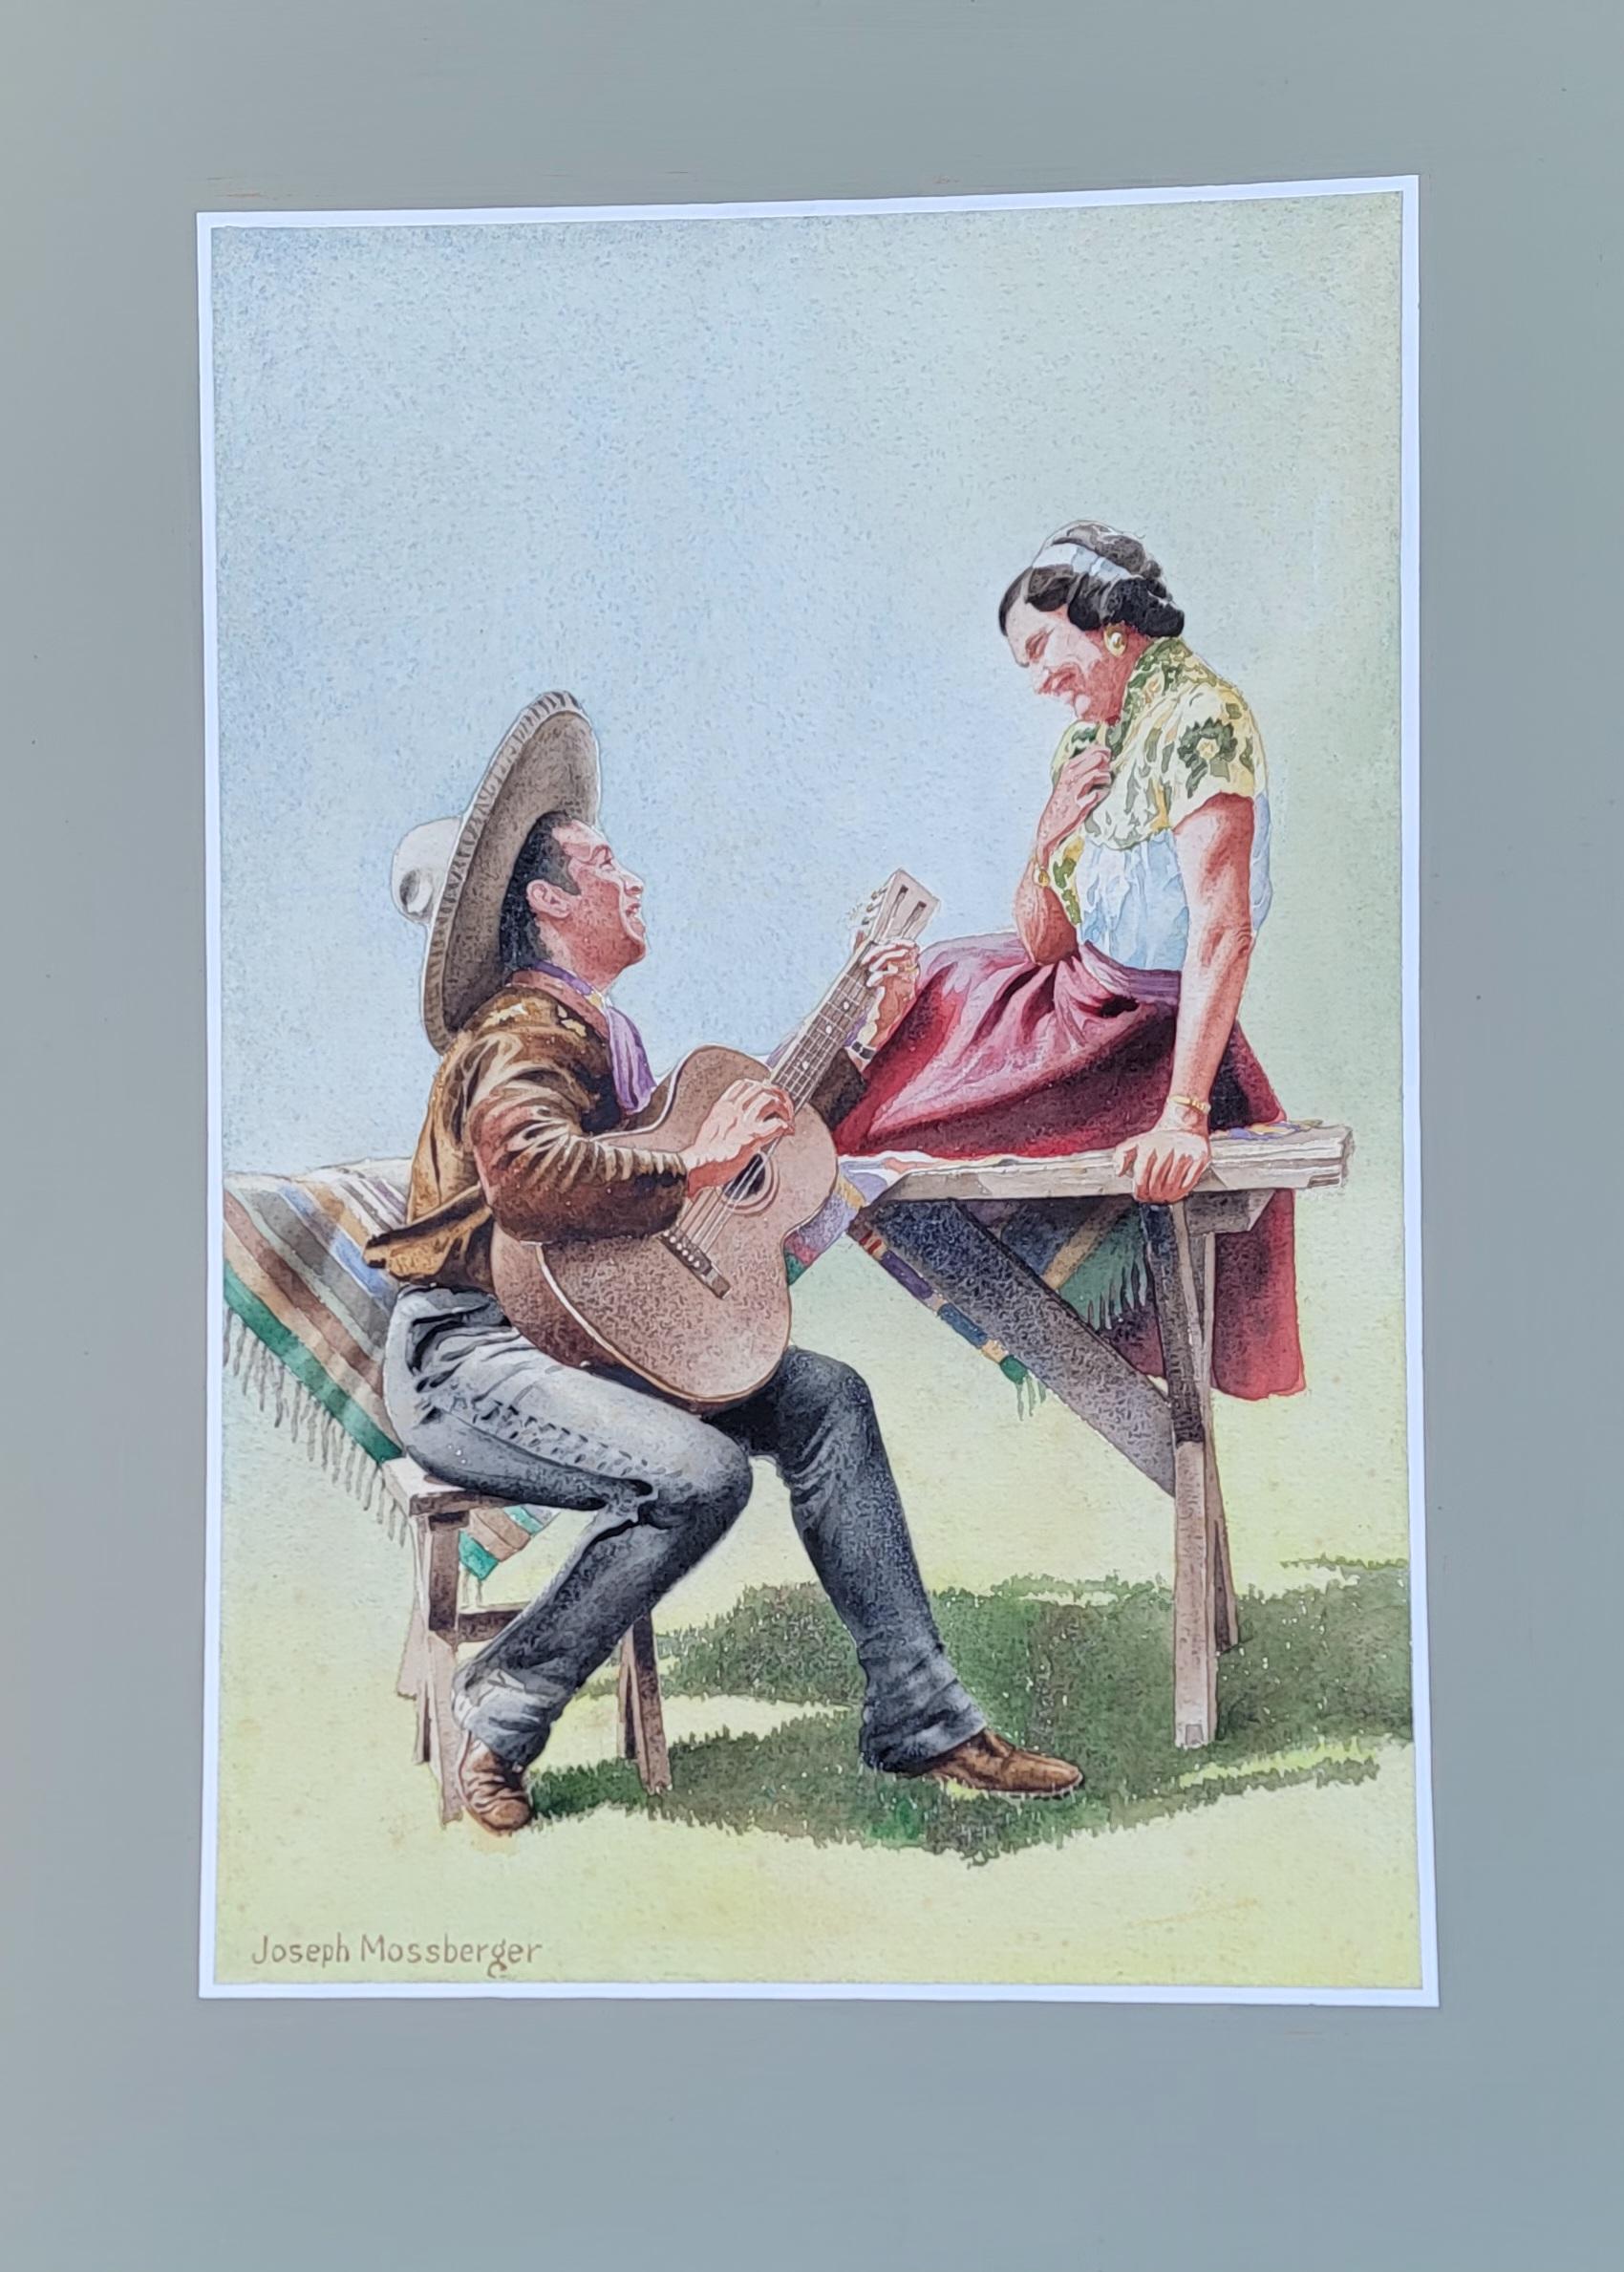 Fine original watercolor painting of a Latin American guitar serenading a seated woman. Primitive table, Mexican blankets and sombrero. Romantic subject matter. Would make a fine addition to a California Rancho or Mission Style interior. Work on